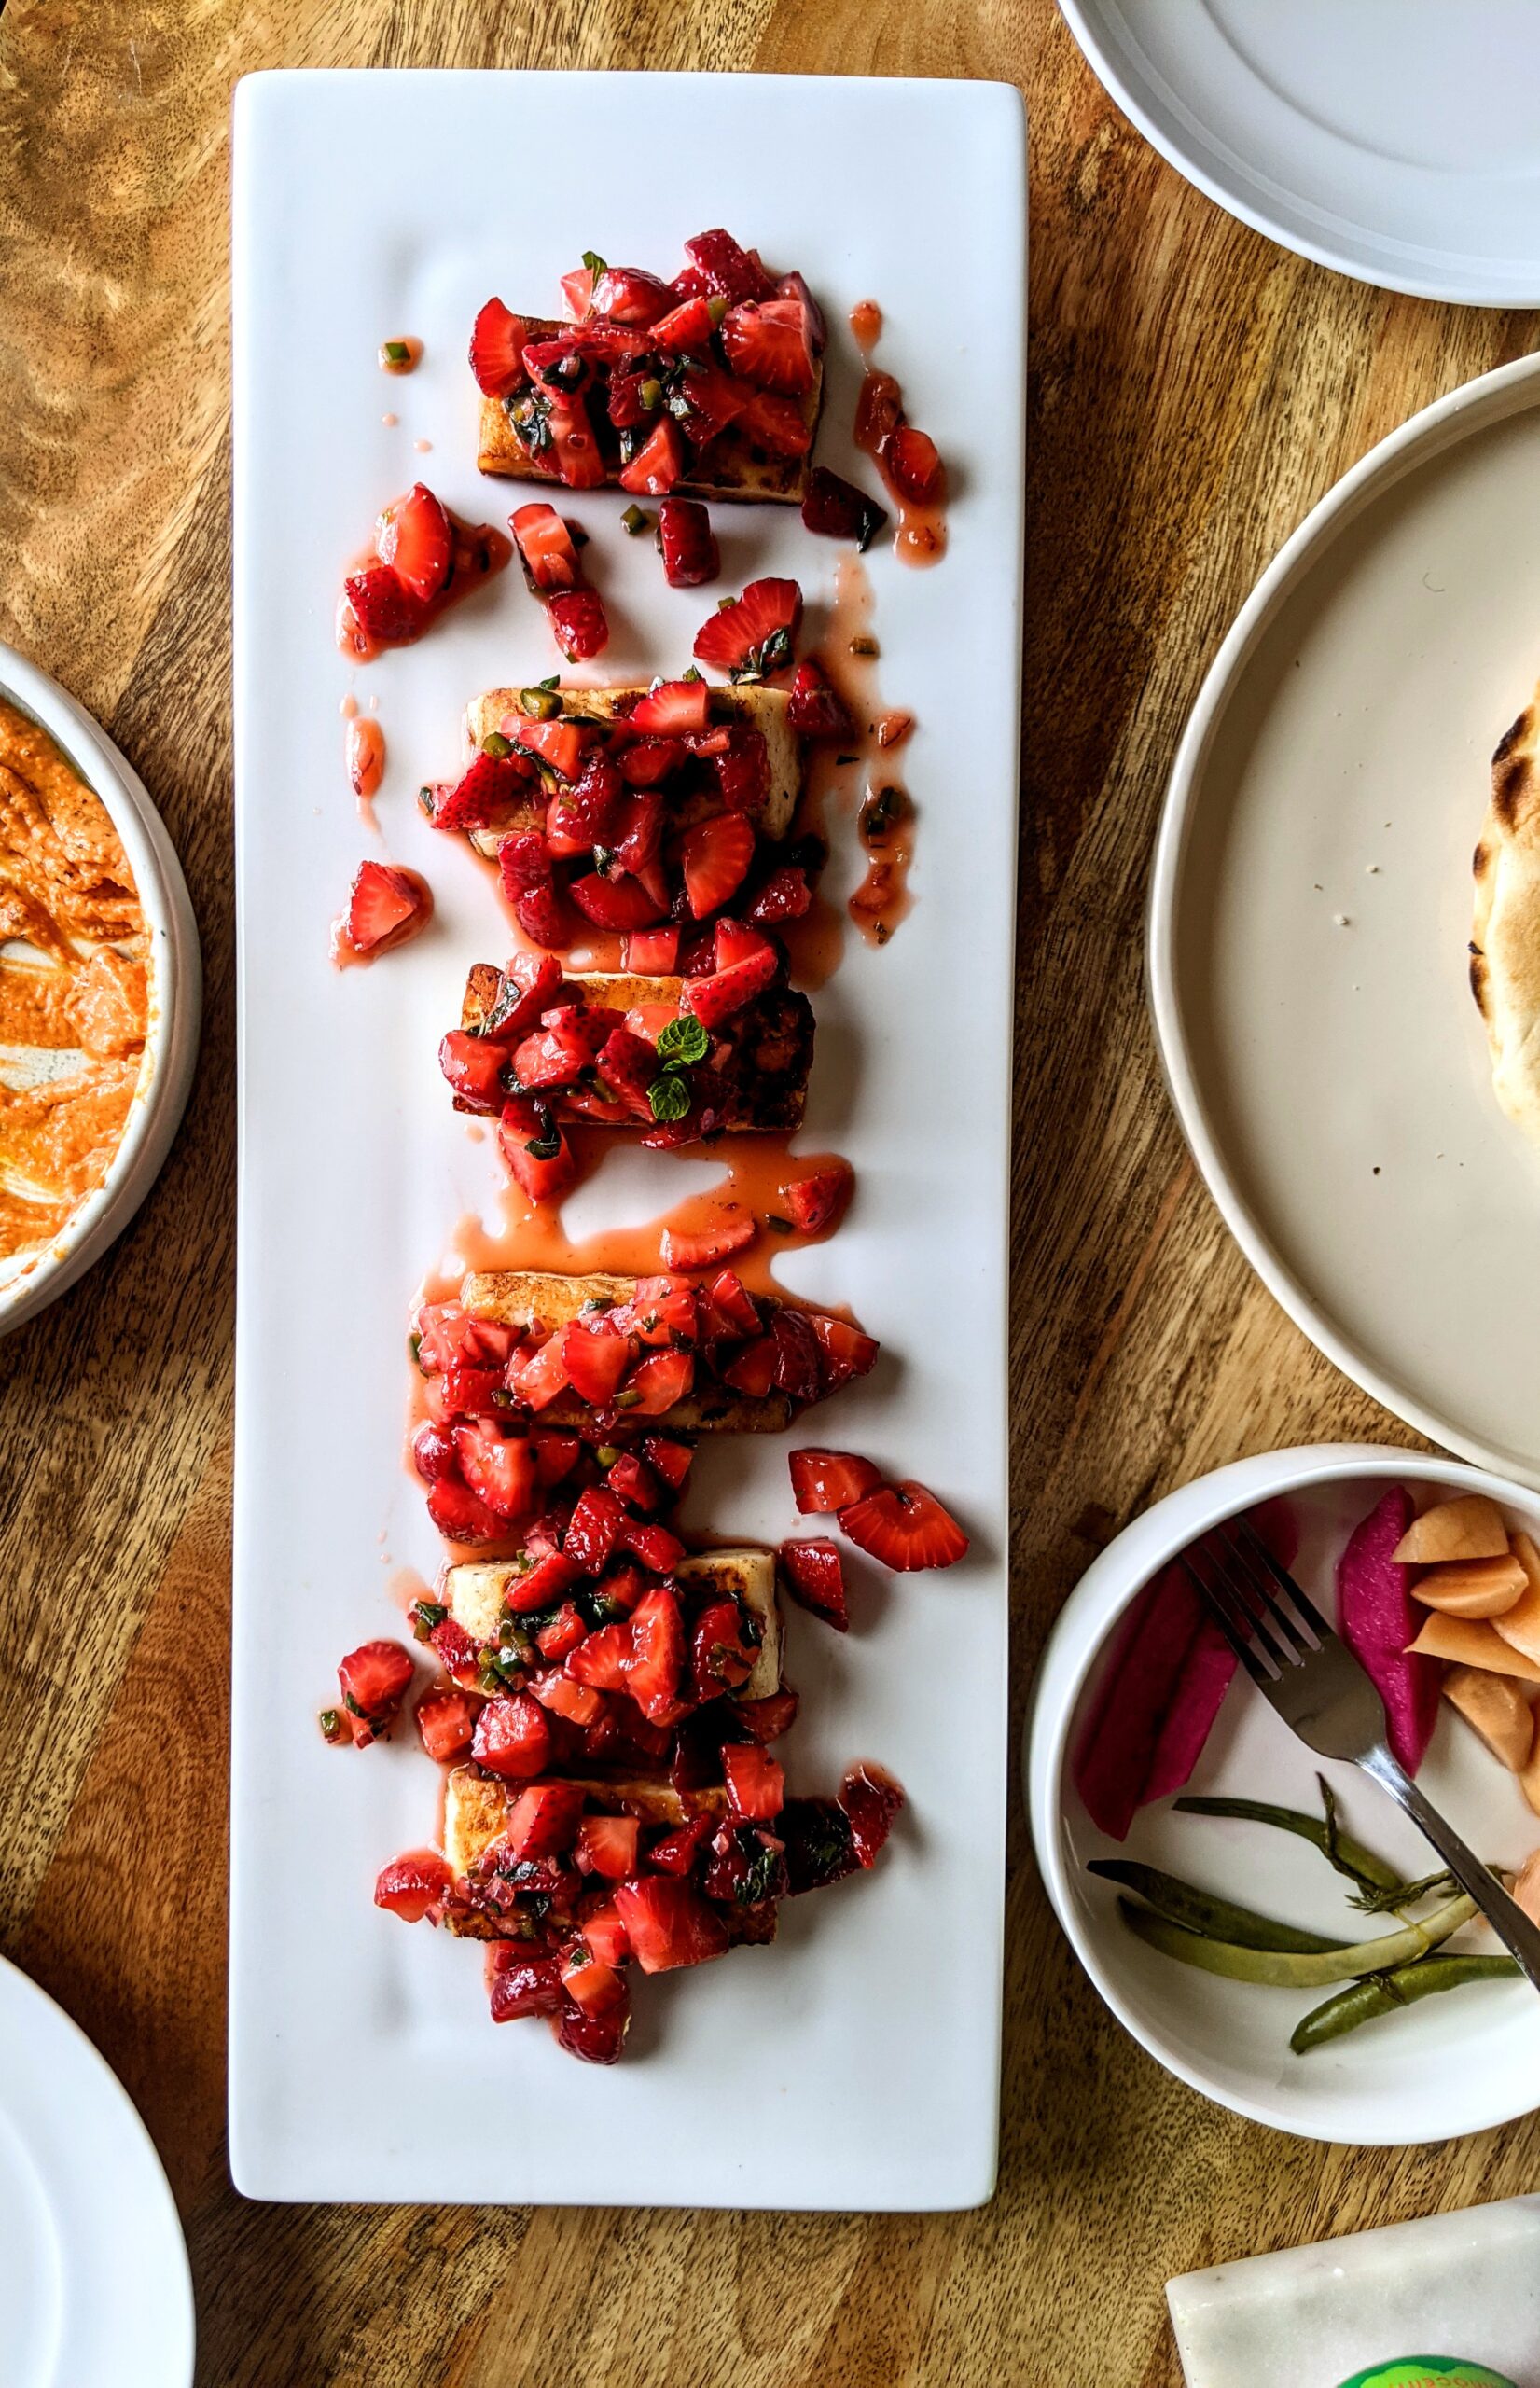 Six pieces of salty grilled Halloumi cheese, topped with sweet and spicy strawberry salsa. This dish is plated on a long white platter, surrounded by other dips and a variety of homemade pickles.